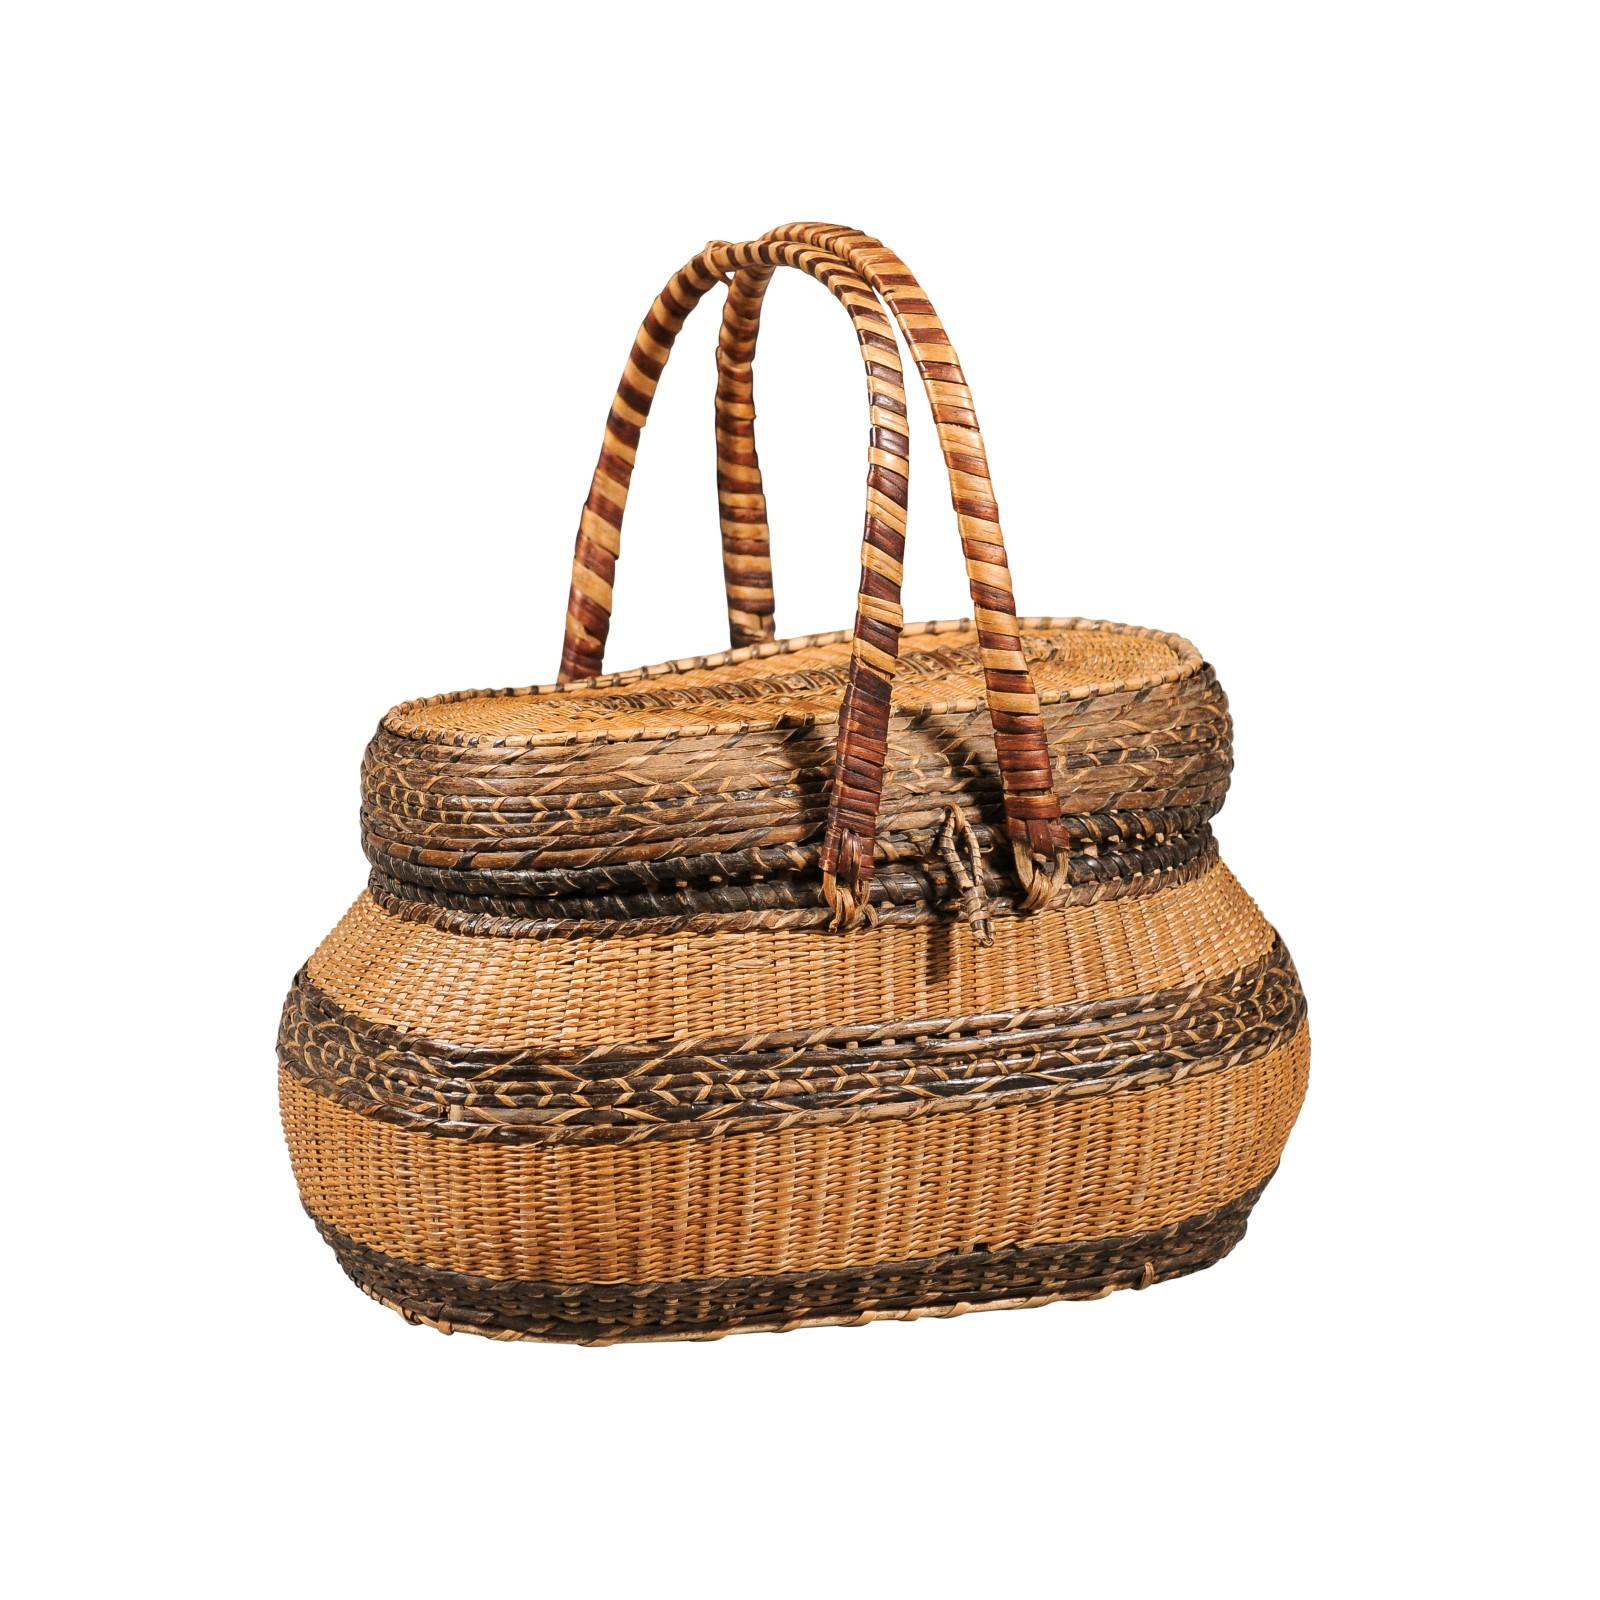 A Swedish oval wicker basket from the late 19th century, with two large handles. Charming us with its rustic appearance and complimenting colors, this Swedish basket features an oval lid opening thanks to a woven latch to reveal a convenient storage